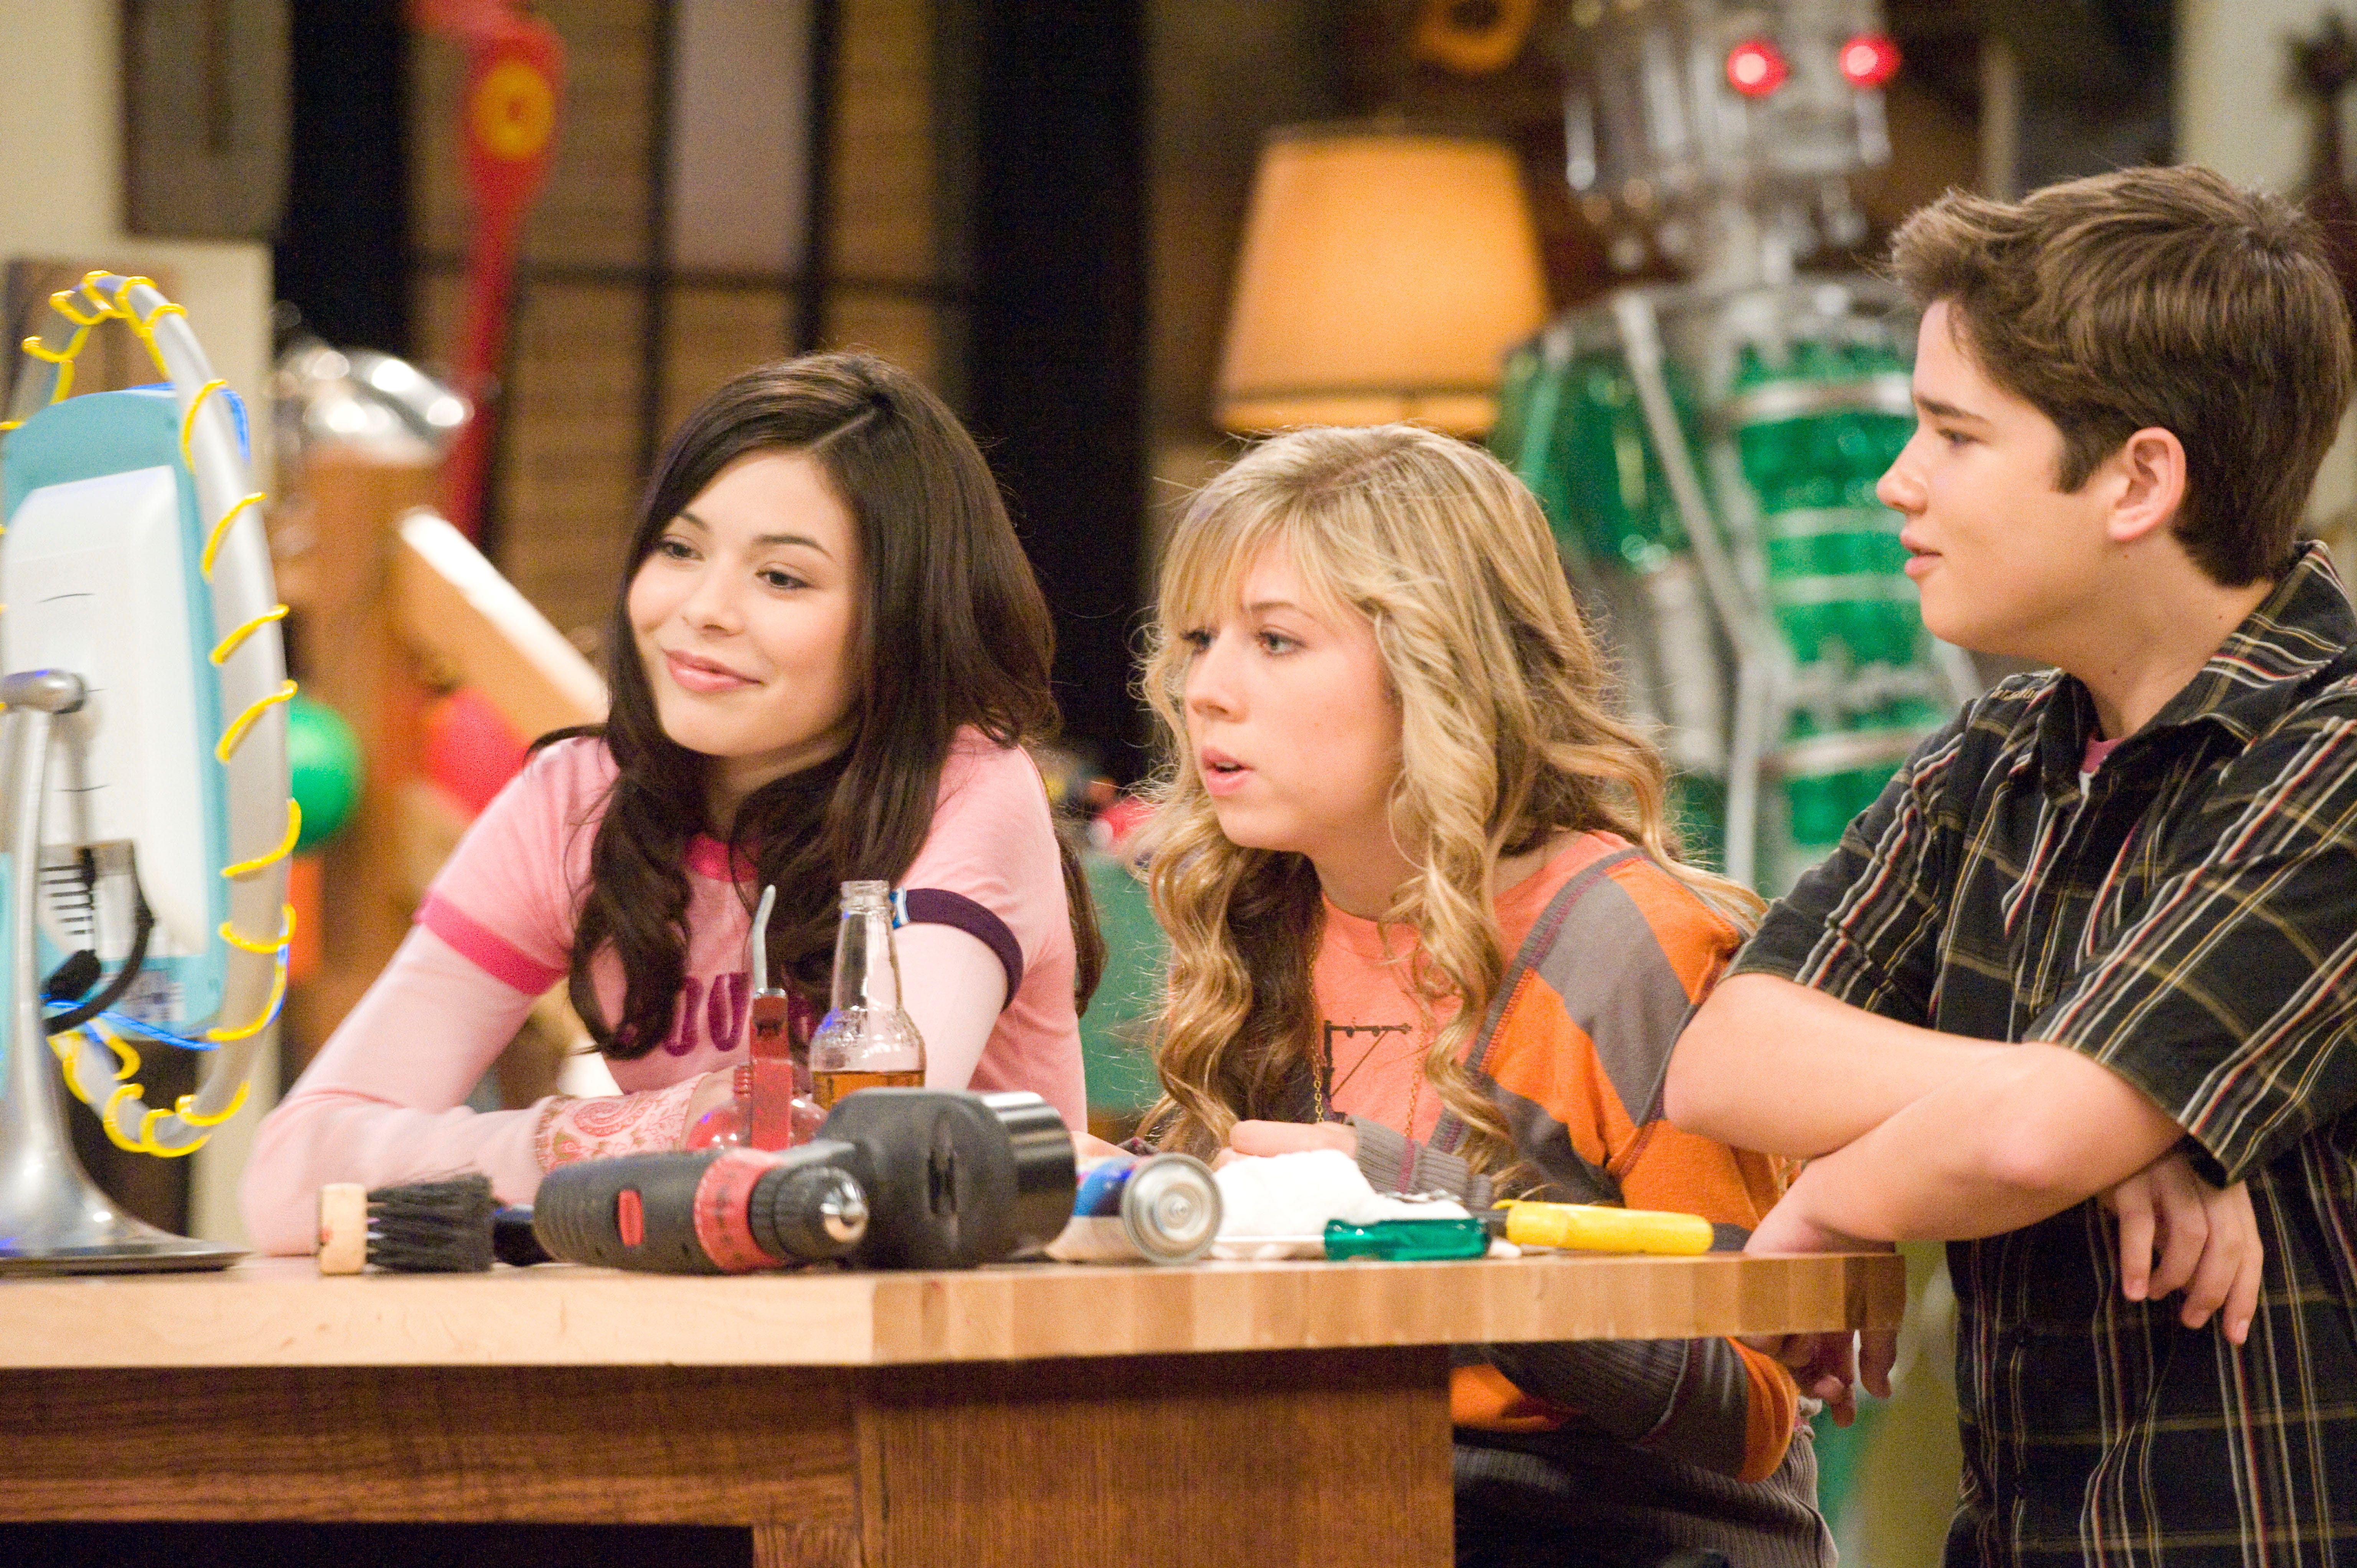 Icarly Reboot Ordered By Paramount With Original Cast Reports